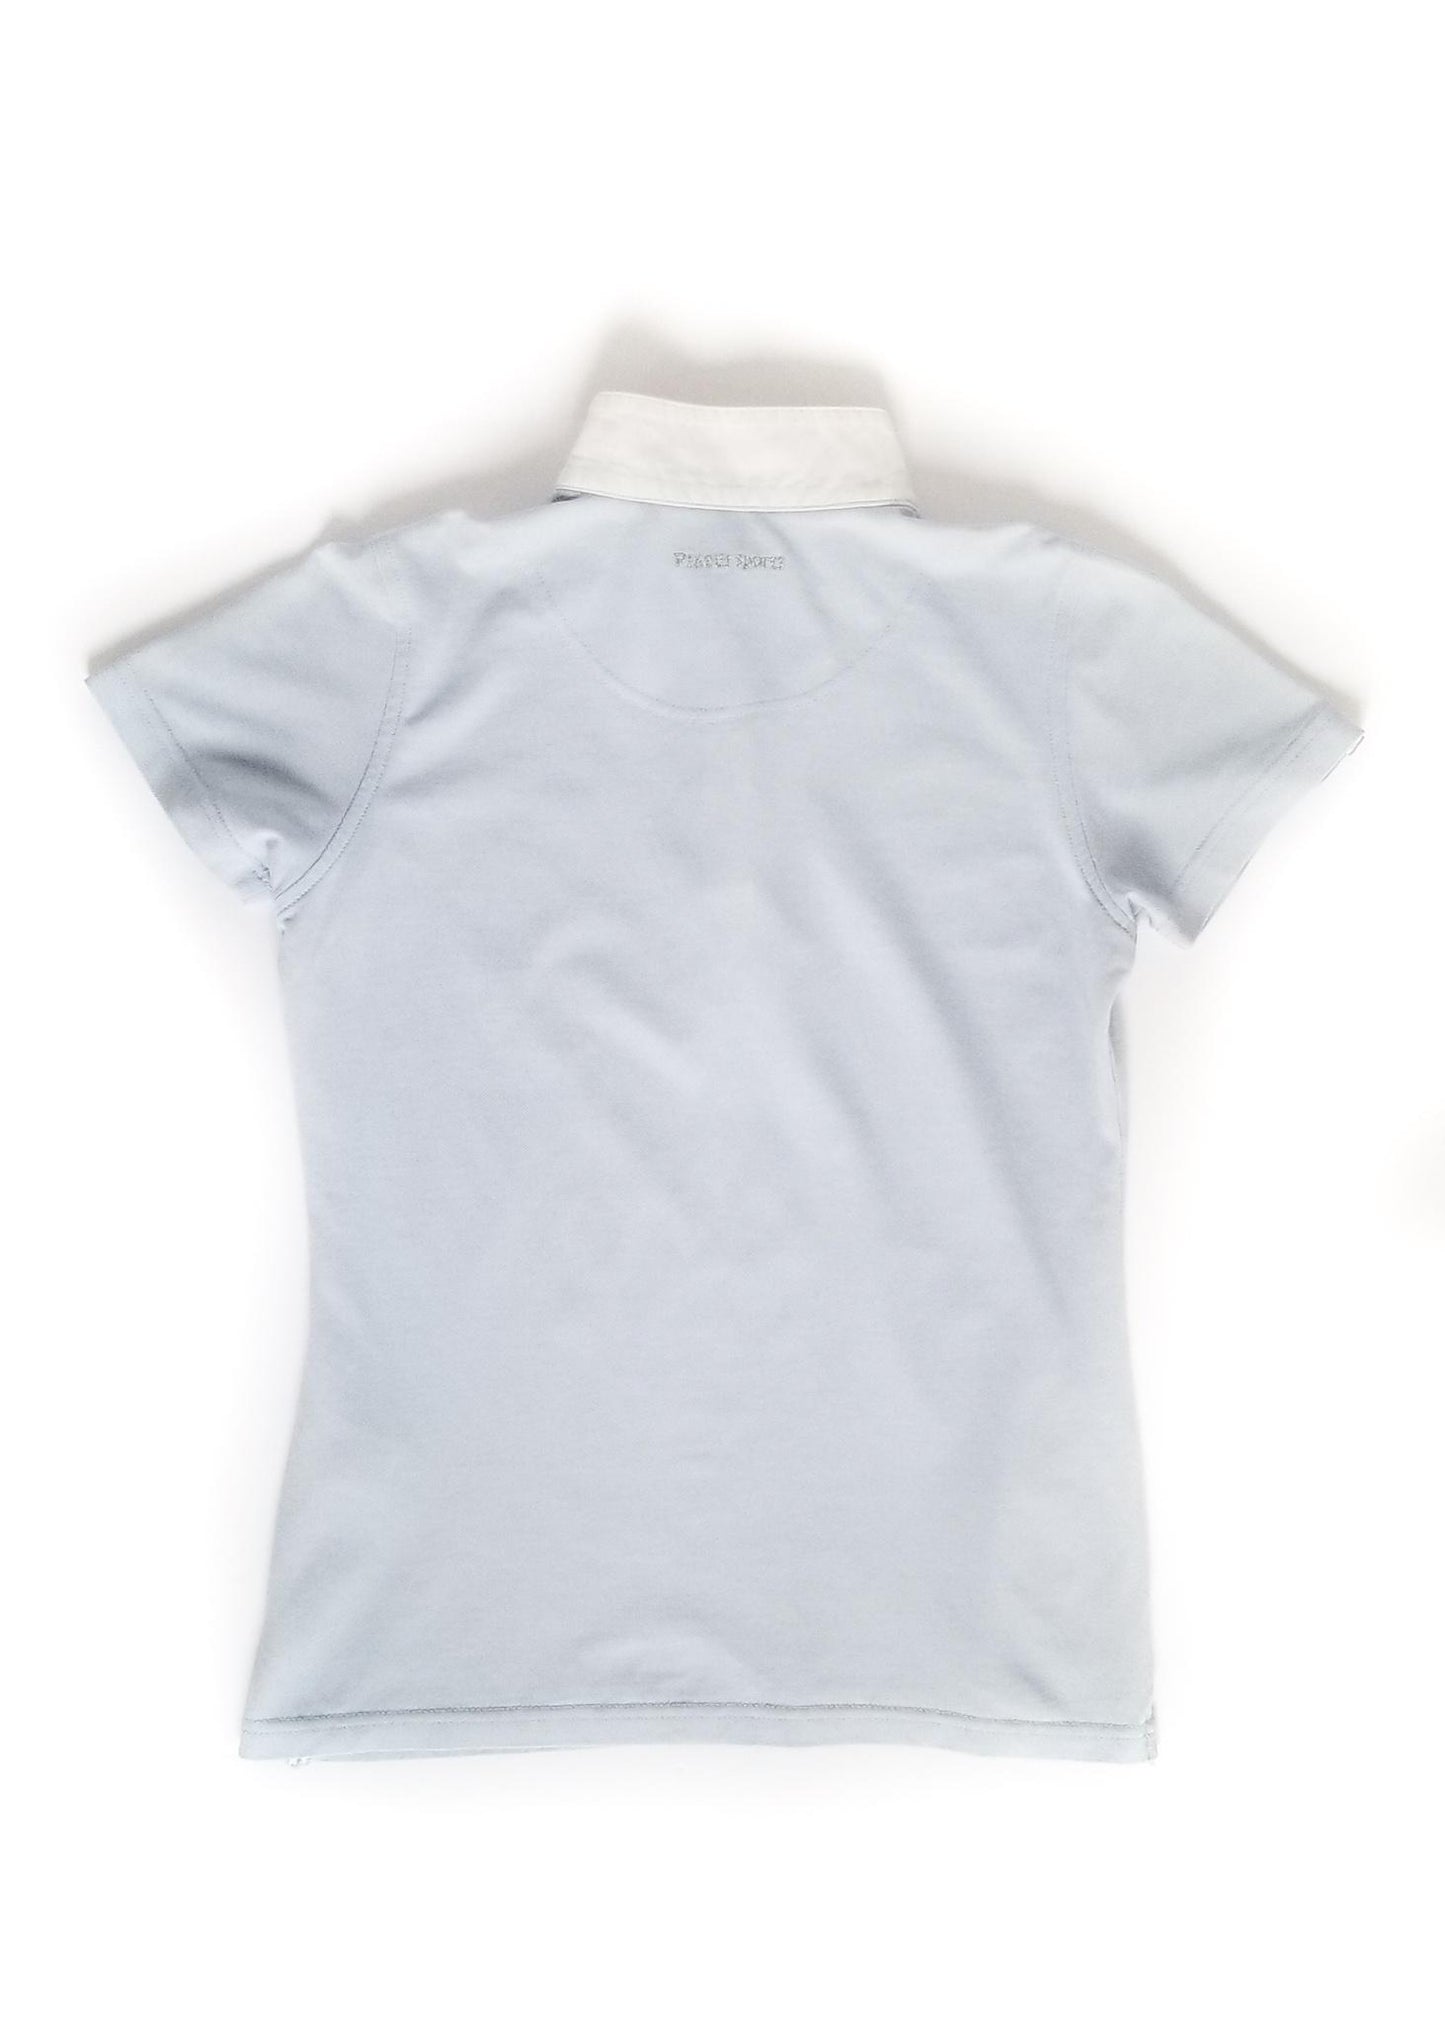 Pikeur Ladies Crystal Show Shirt Short Sleeve - Baby Blue - Women's Size 4 (US)